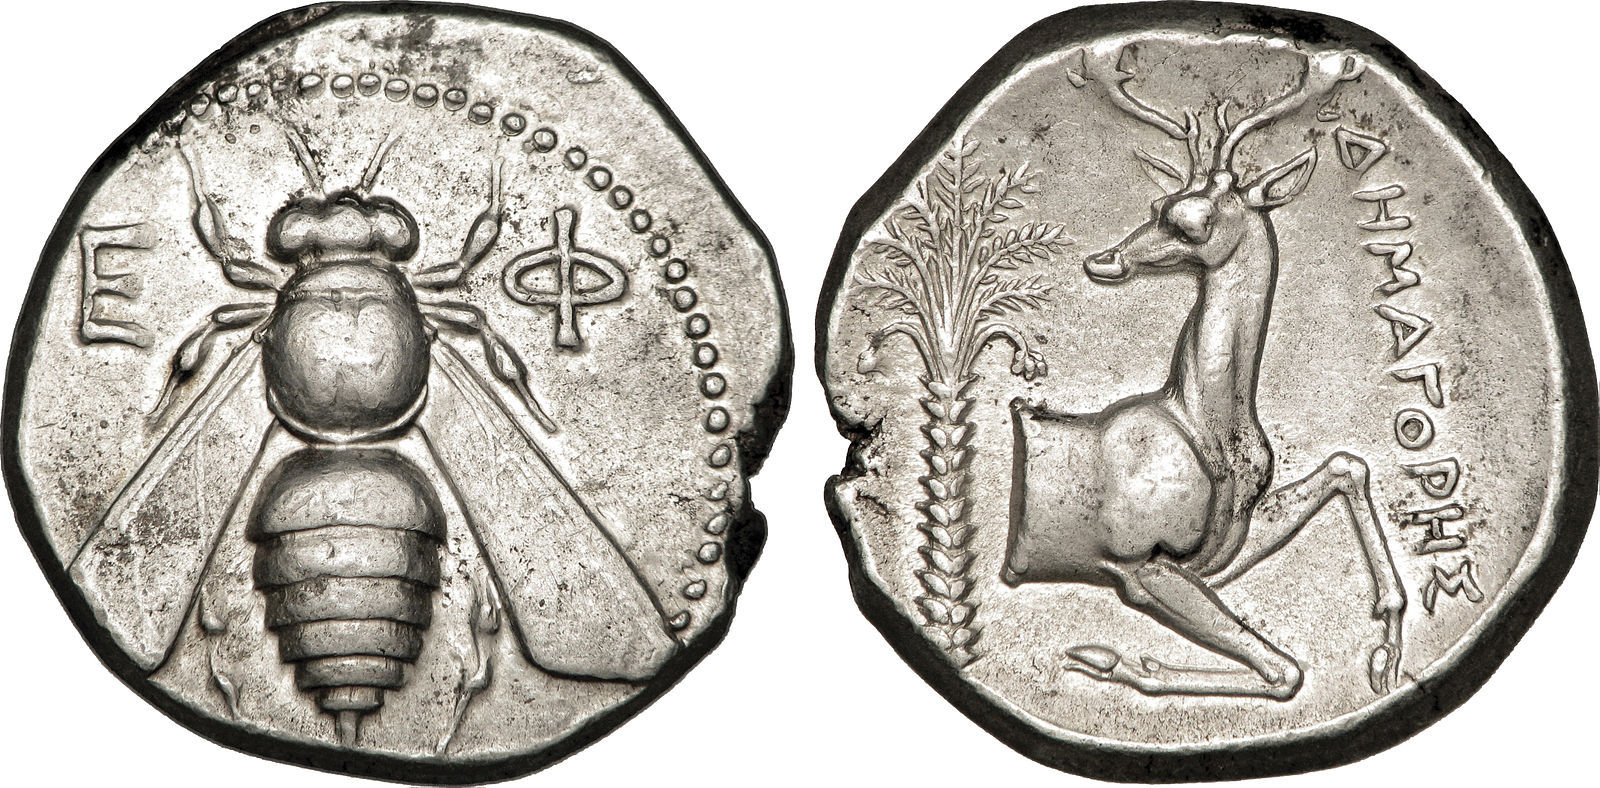 A coin from the Greek city of Ephesus featuring a bee and a stag, 2nd century. The bee, stag, and palm tree are all symbols of the goddess Artemis.jpg